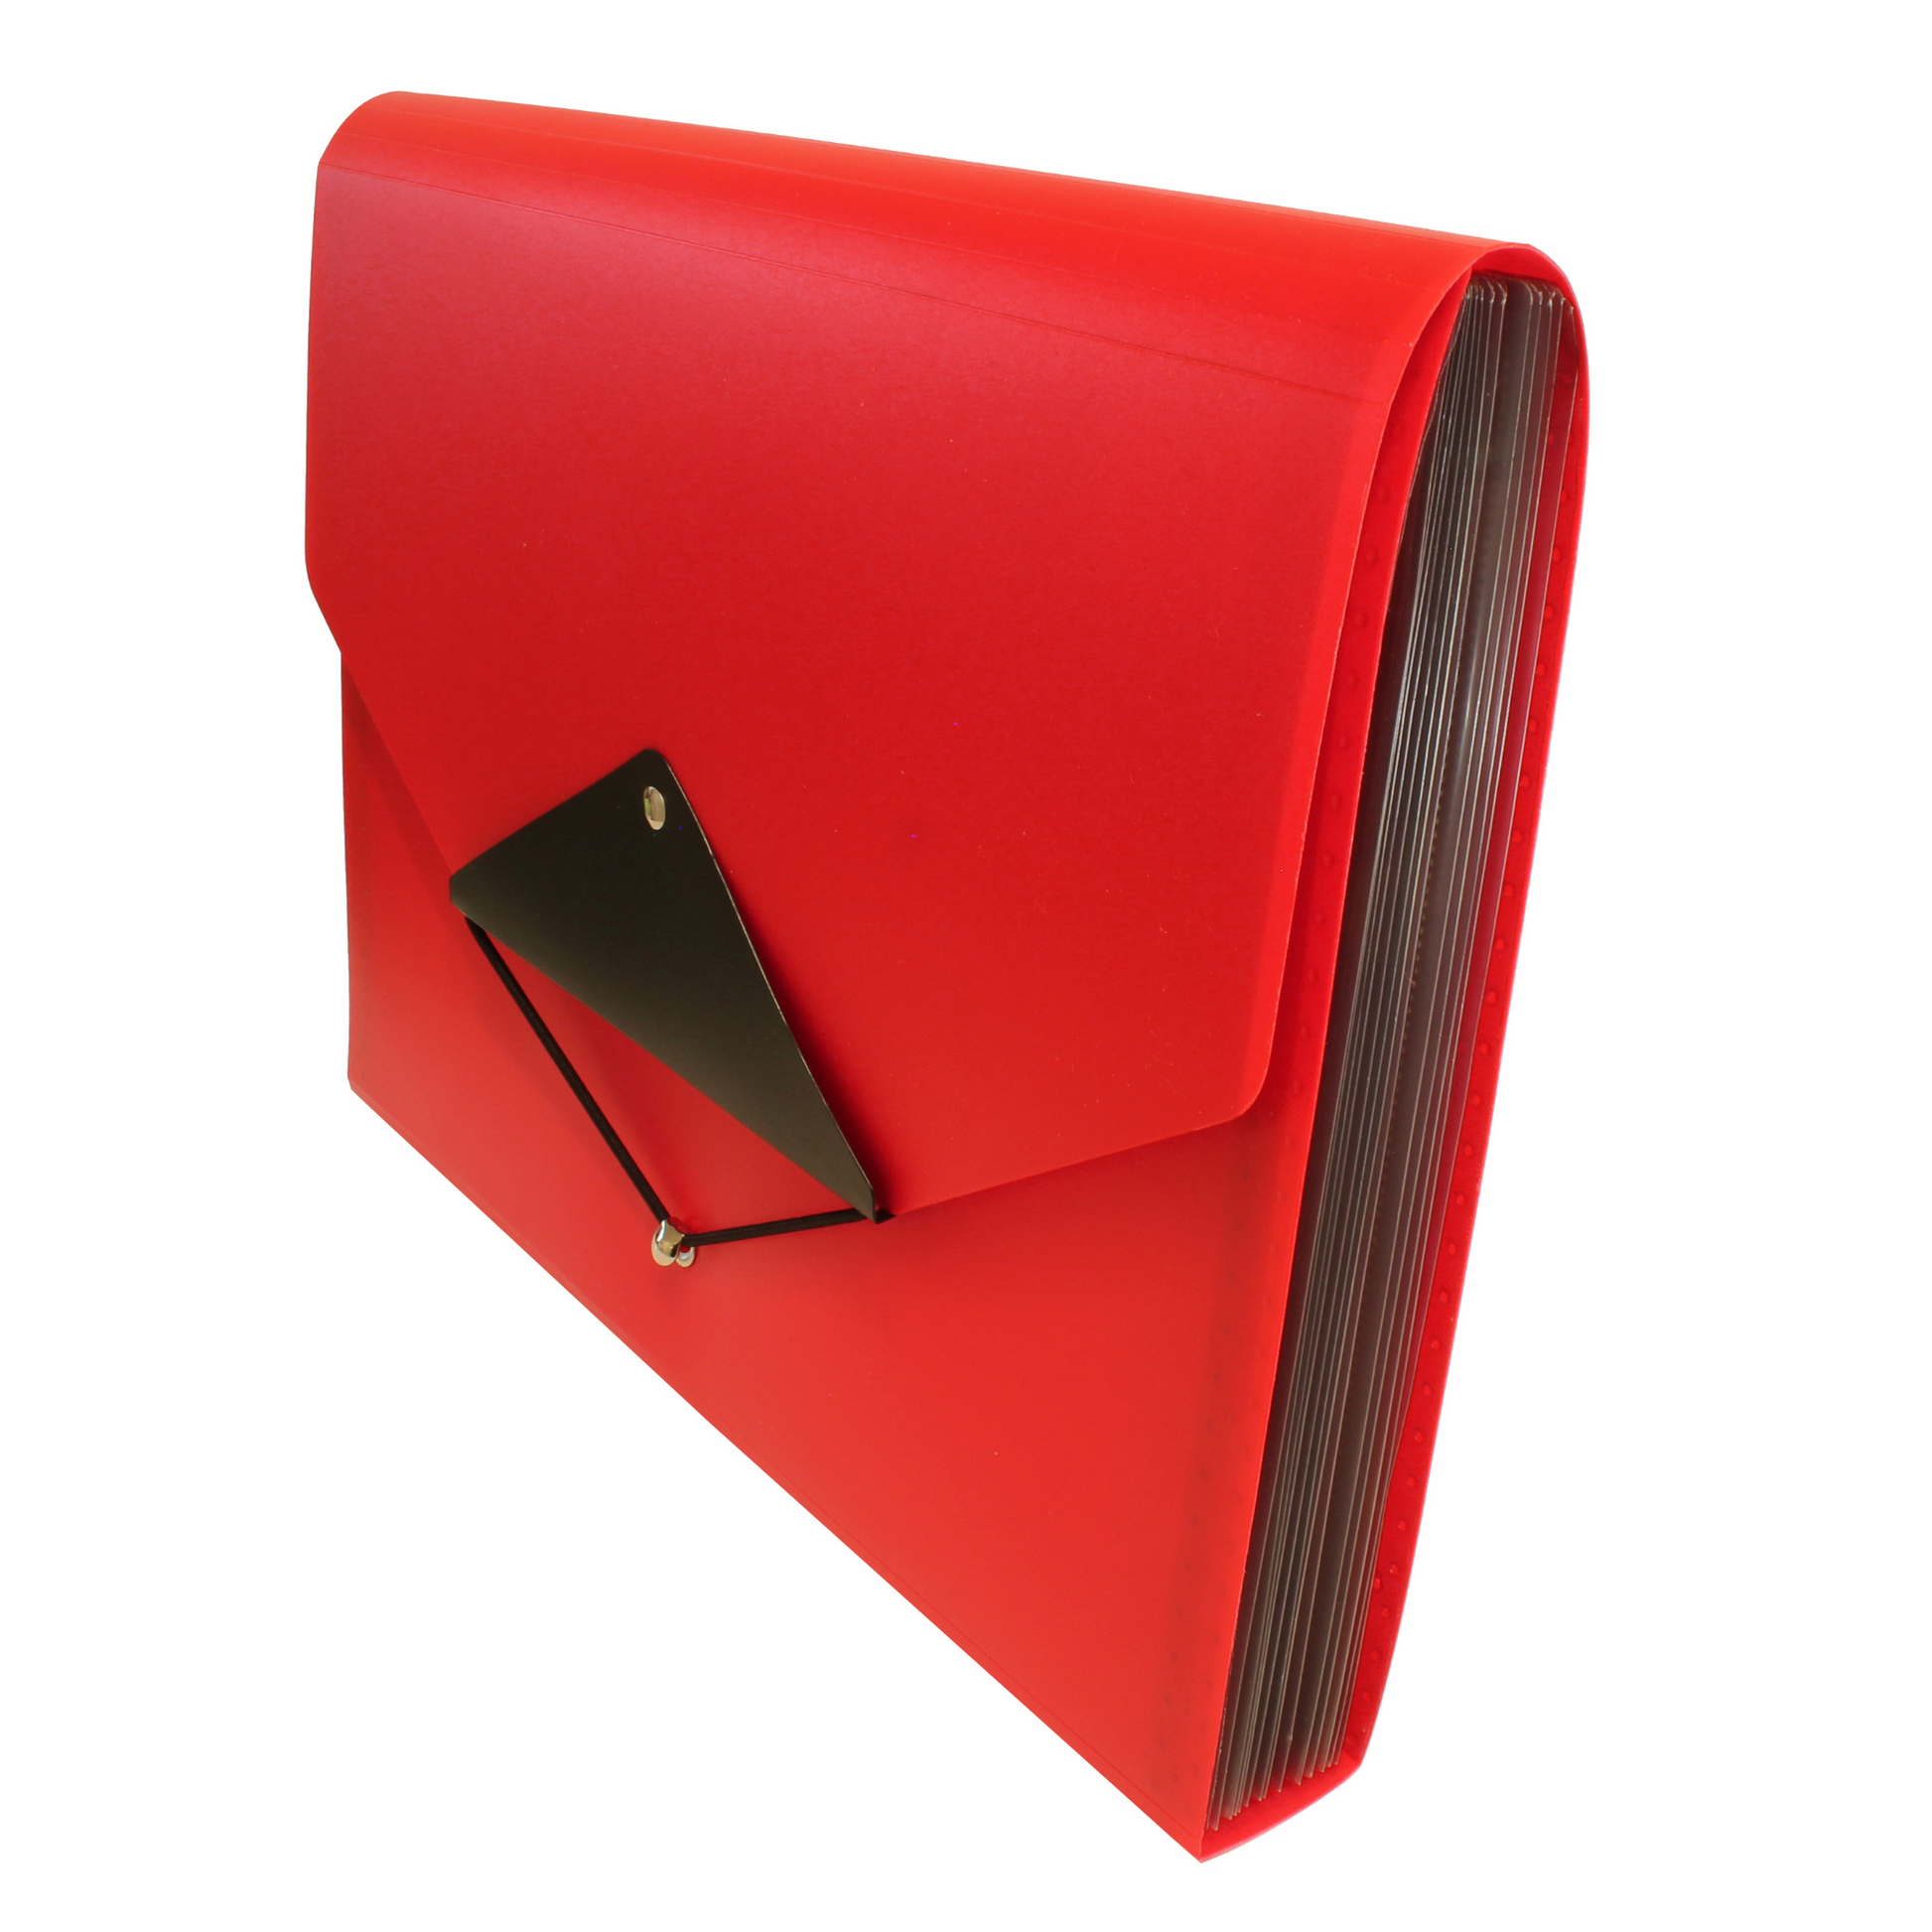 A bright red envelope-style folder with a triangular flap and elastic closure. The folder is made of a smooth, matte polypropylene material and is designed to hold a substantial number of documents, as suggested by its compact concertina side profile.